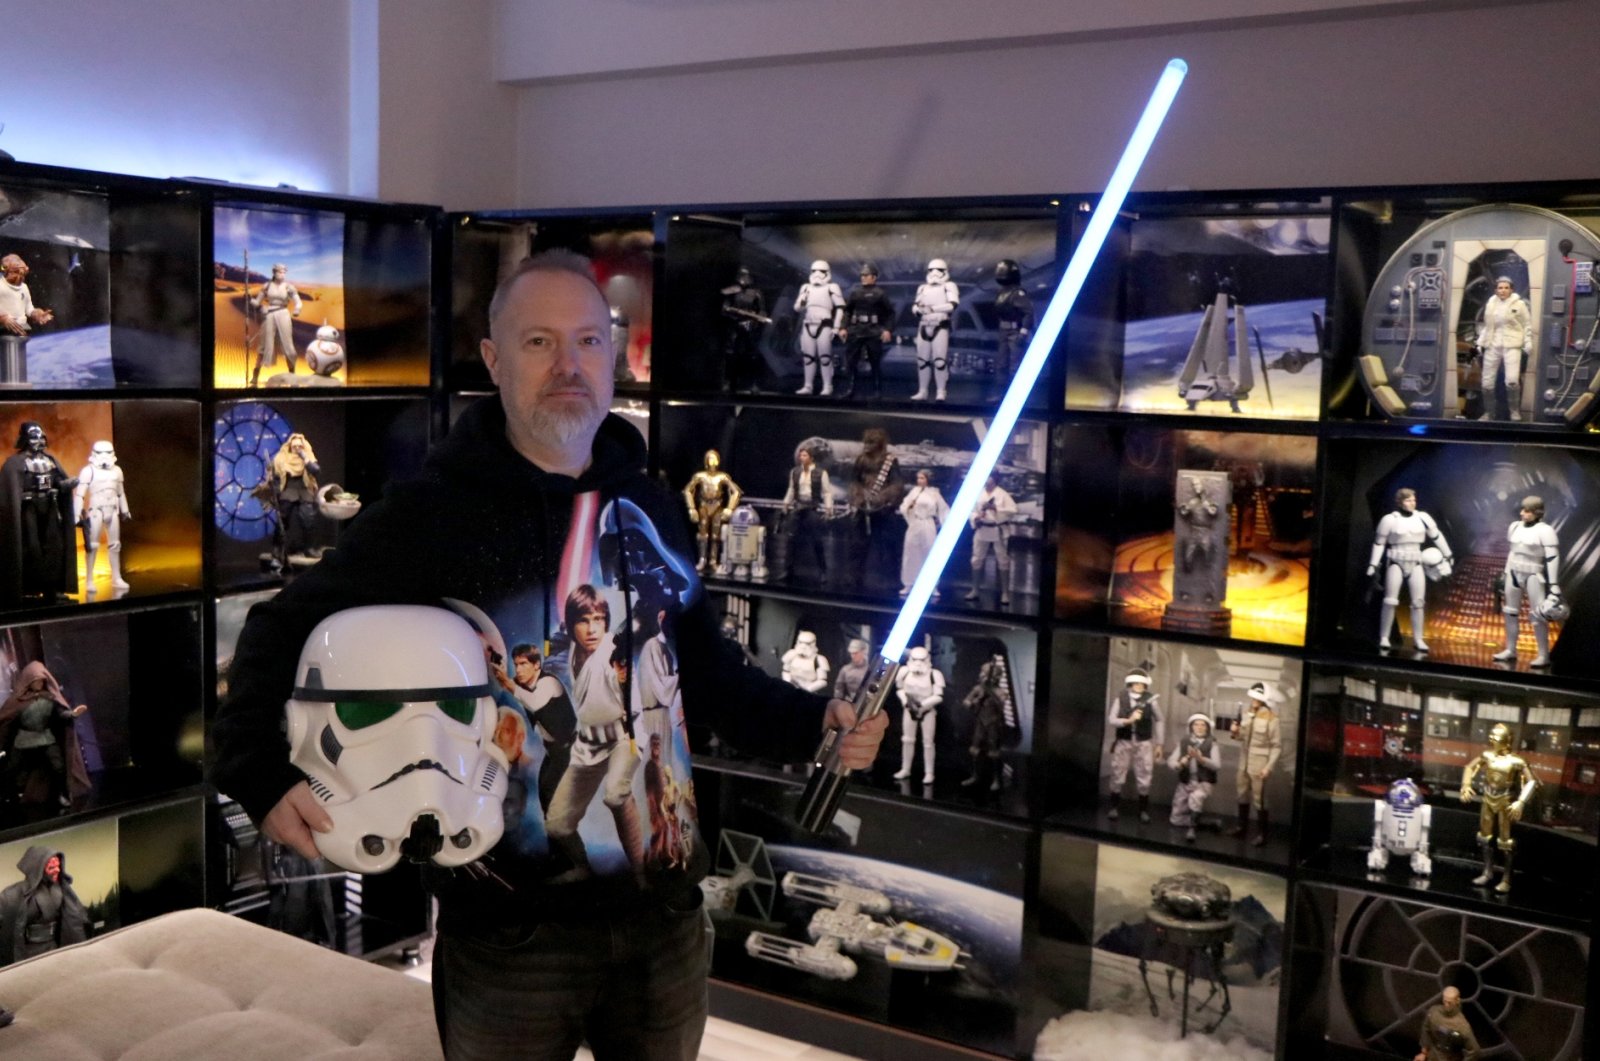 Cihat Uygun poses with the pieces of his collection exhibited in the "Star Wars" museum in his living room, Edirne, Turkey, Feb. 24, 2022. (DHA PHOTO)